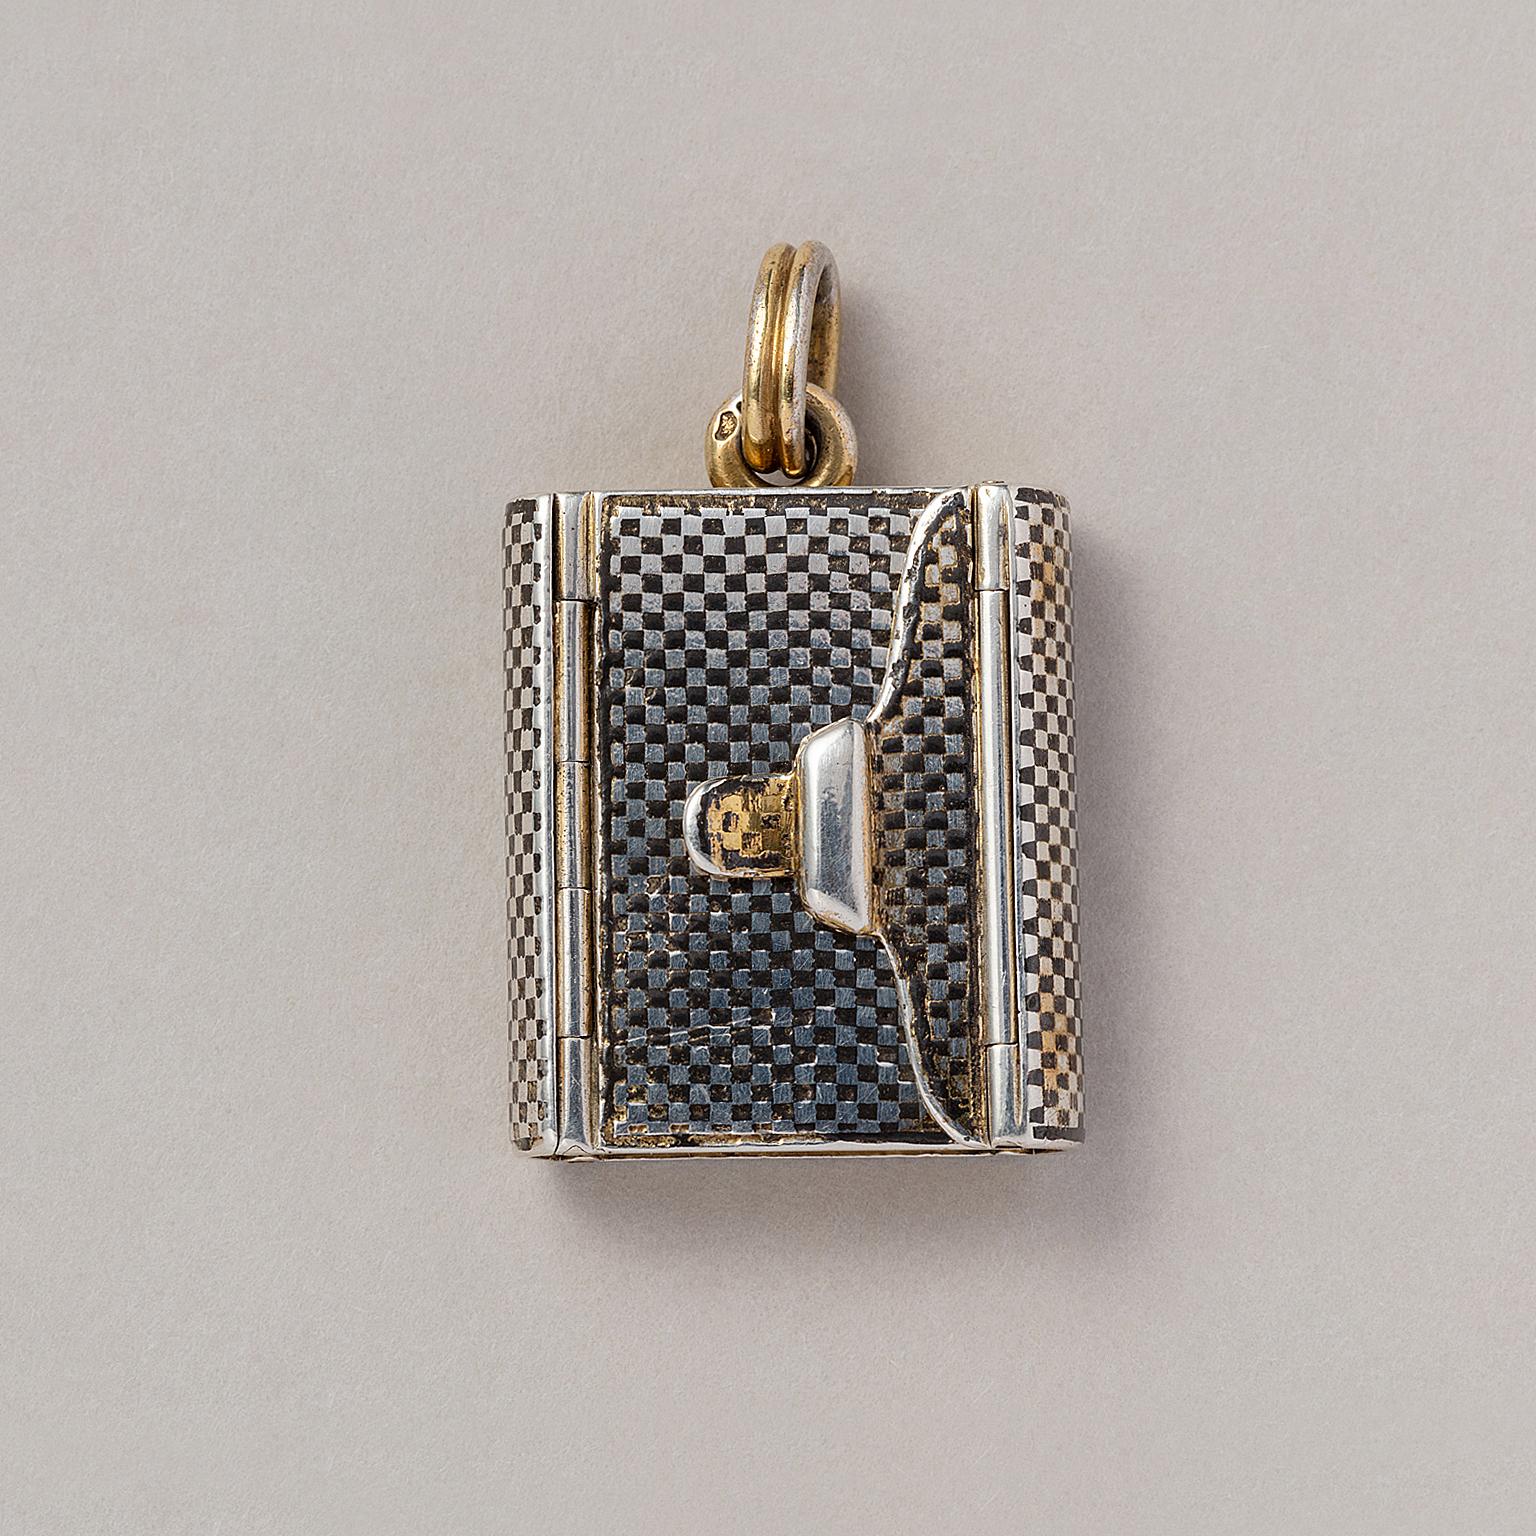 A silver gilt and niello locket in the shape of an envelope or book, with four compartments, France, circa 1880.
dimensions: 3.2 x 2.2 cm
weight: 16.68 grams 
